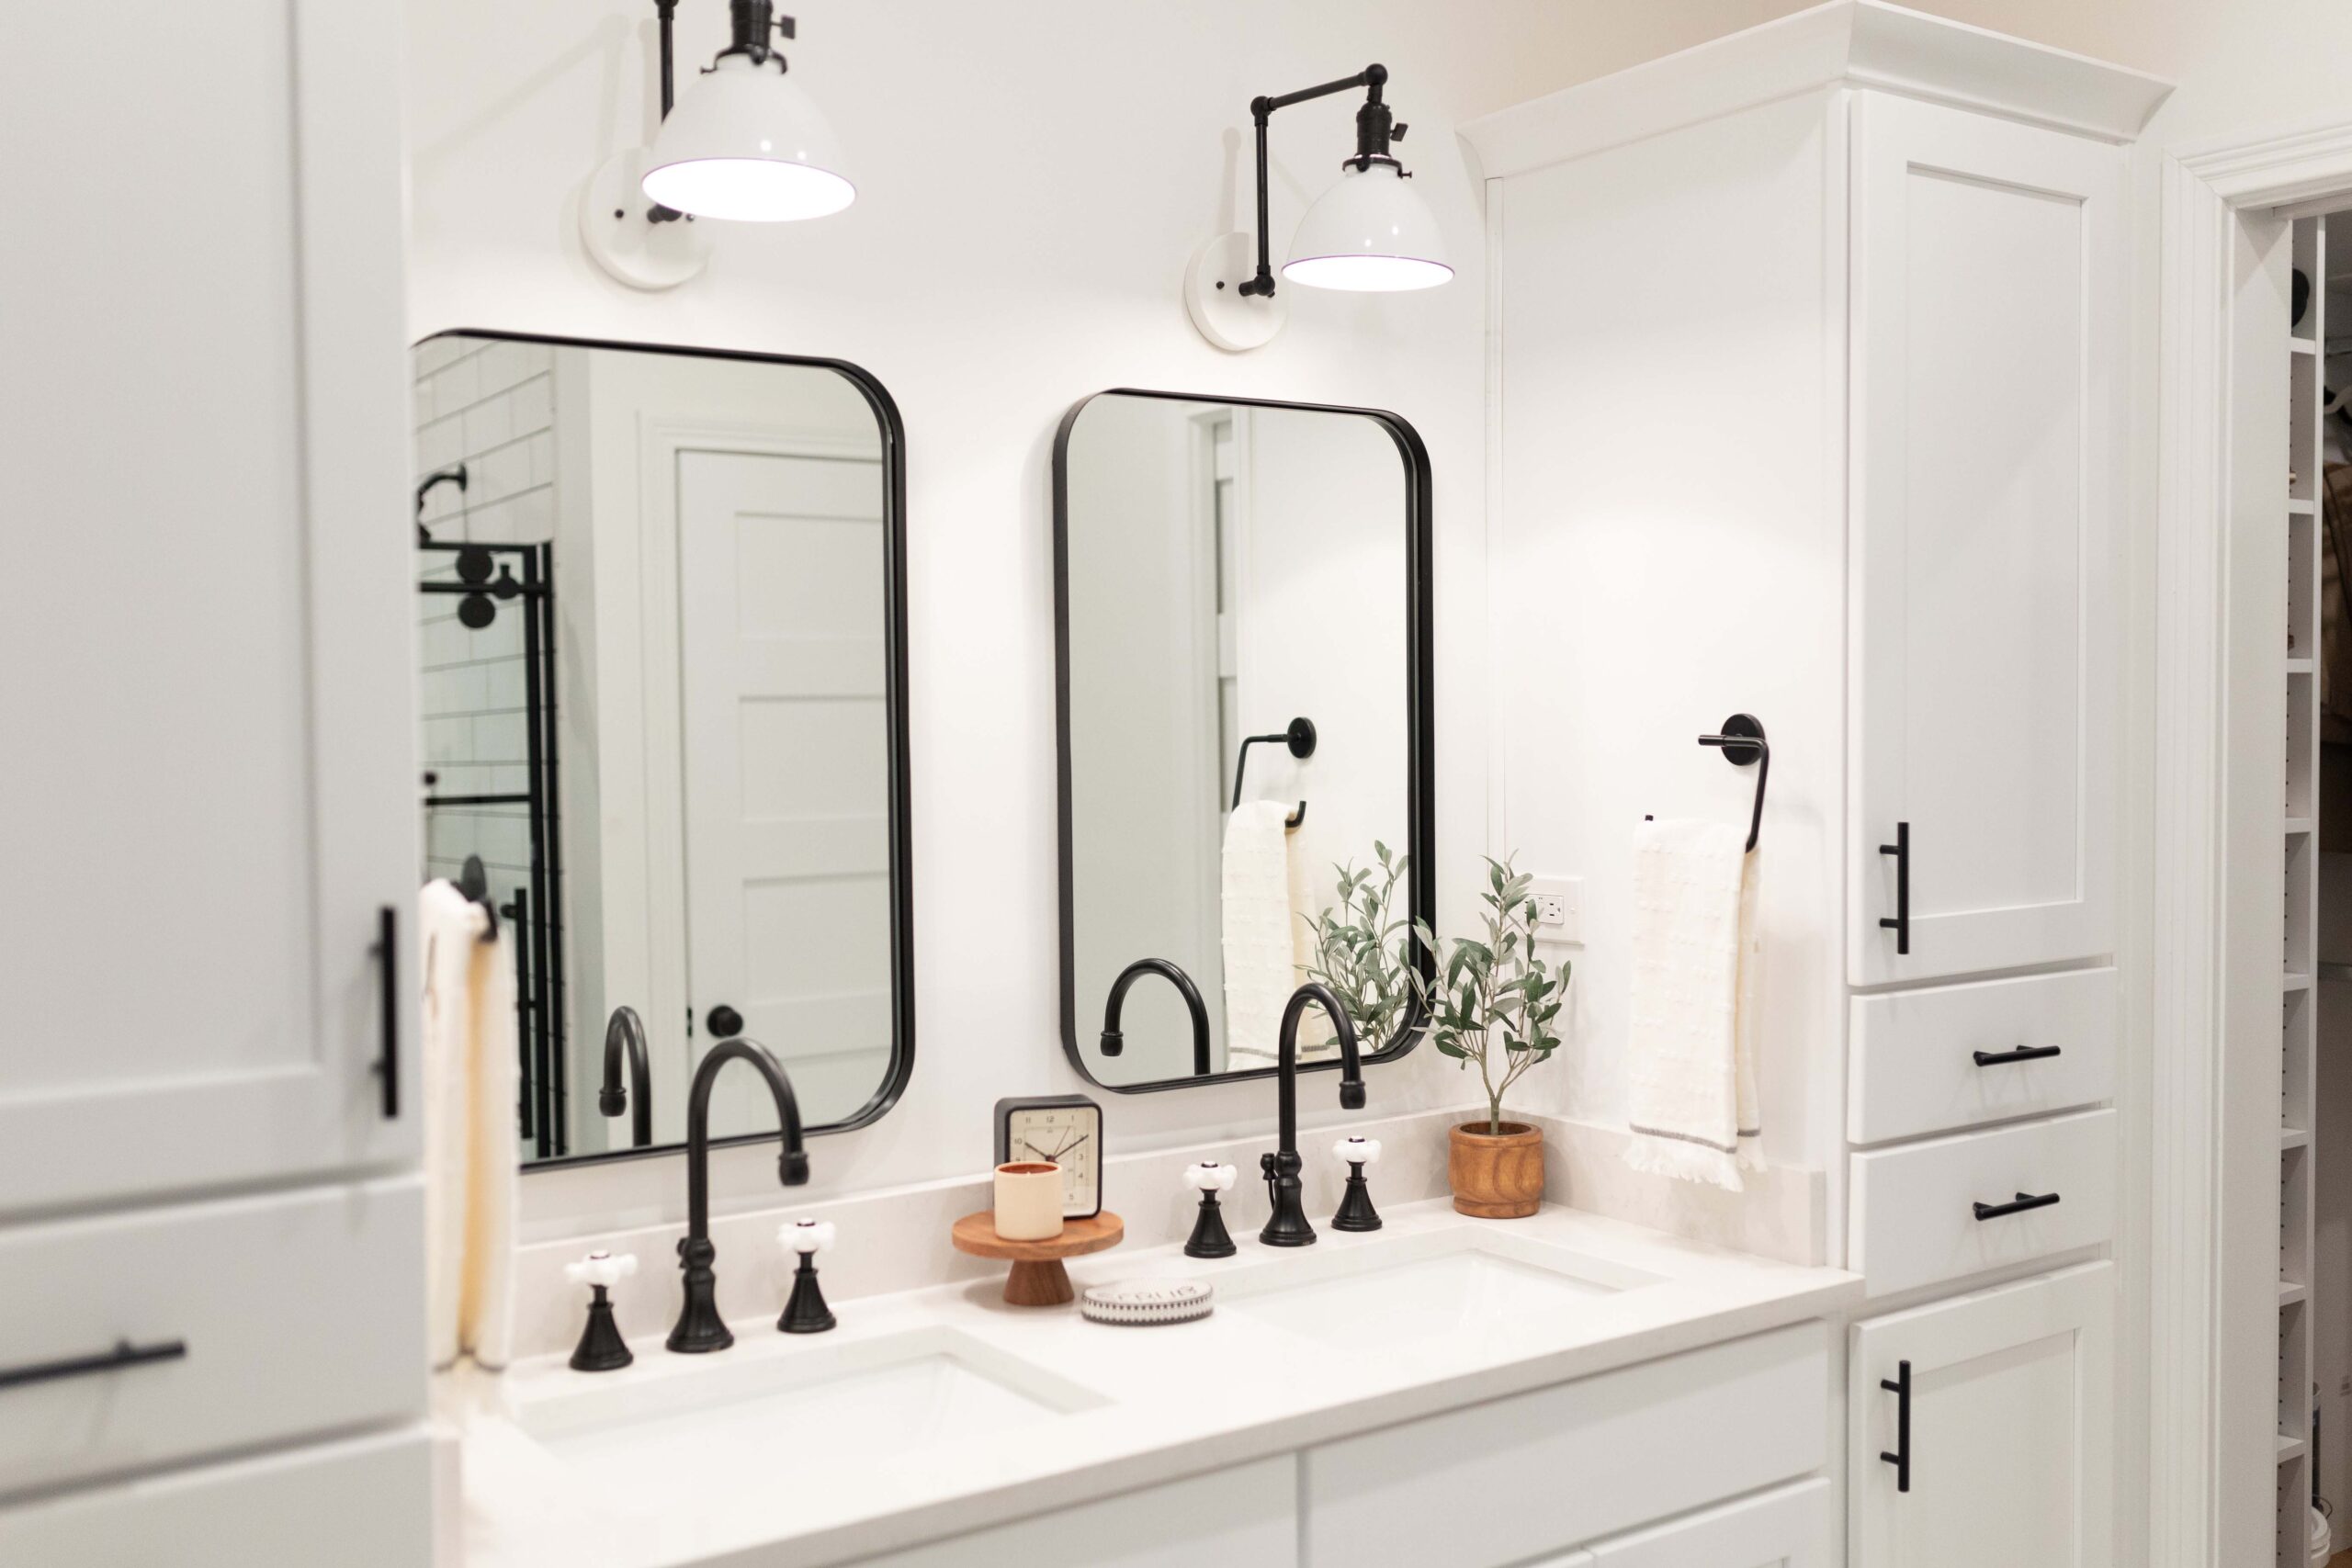 White bathroom cabinets with black mirrors and light fixtures.